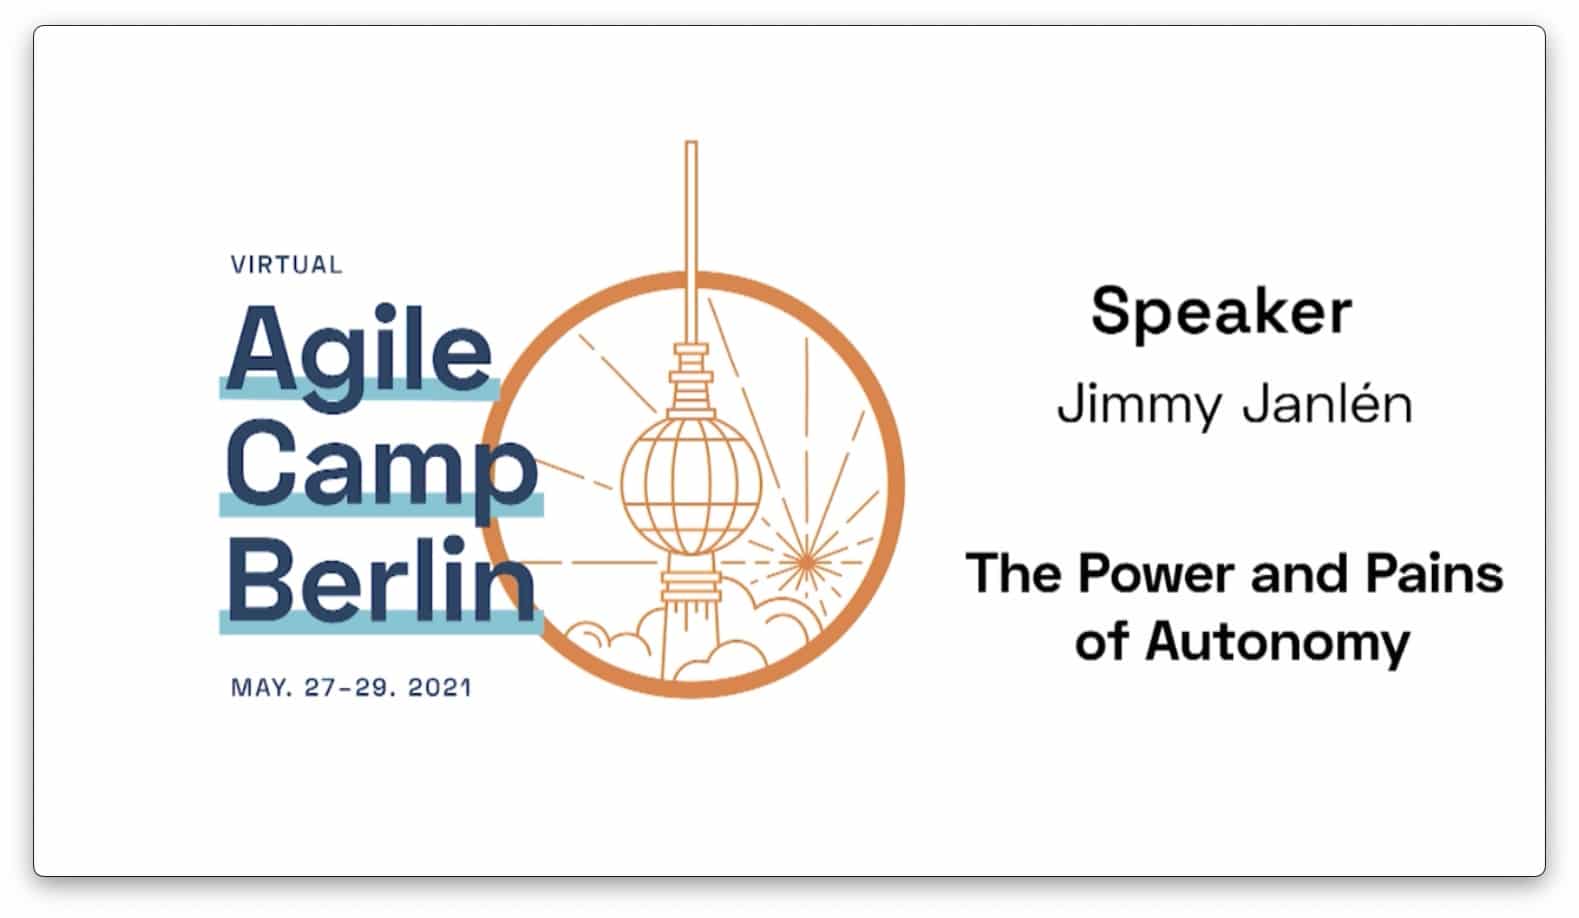 📺 The Power and Pains of Autonomy — Jimmy Janlén at the Agile Camp Berlin 2021